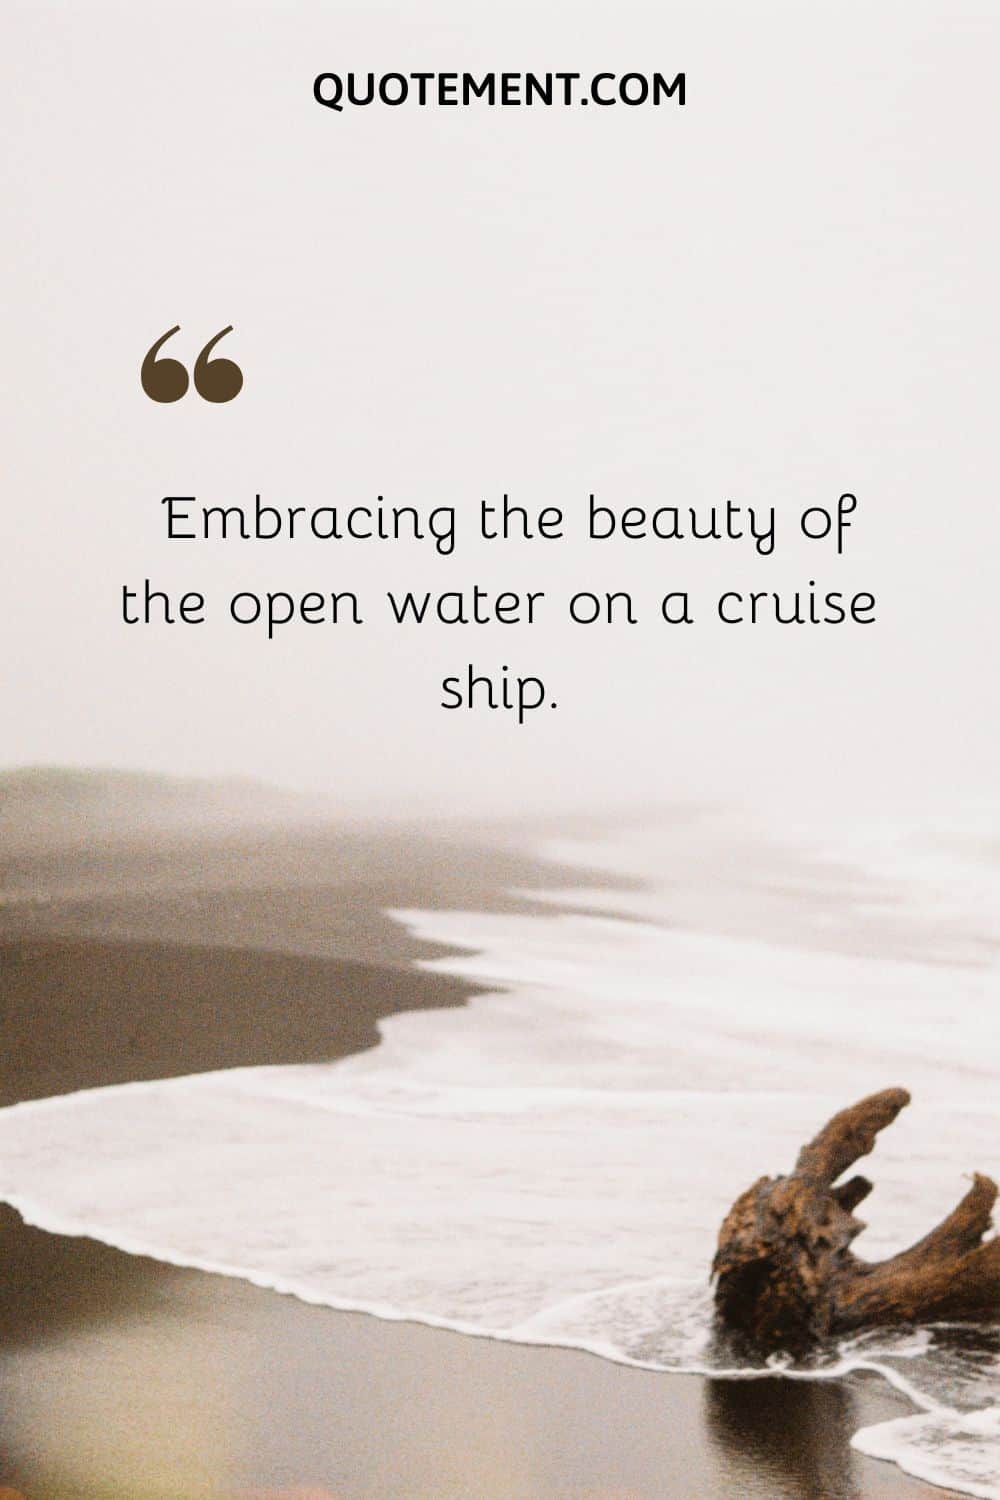 Embracing the beauty of the open water on a cruise ship.